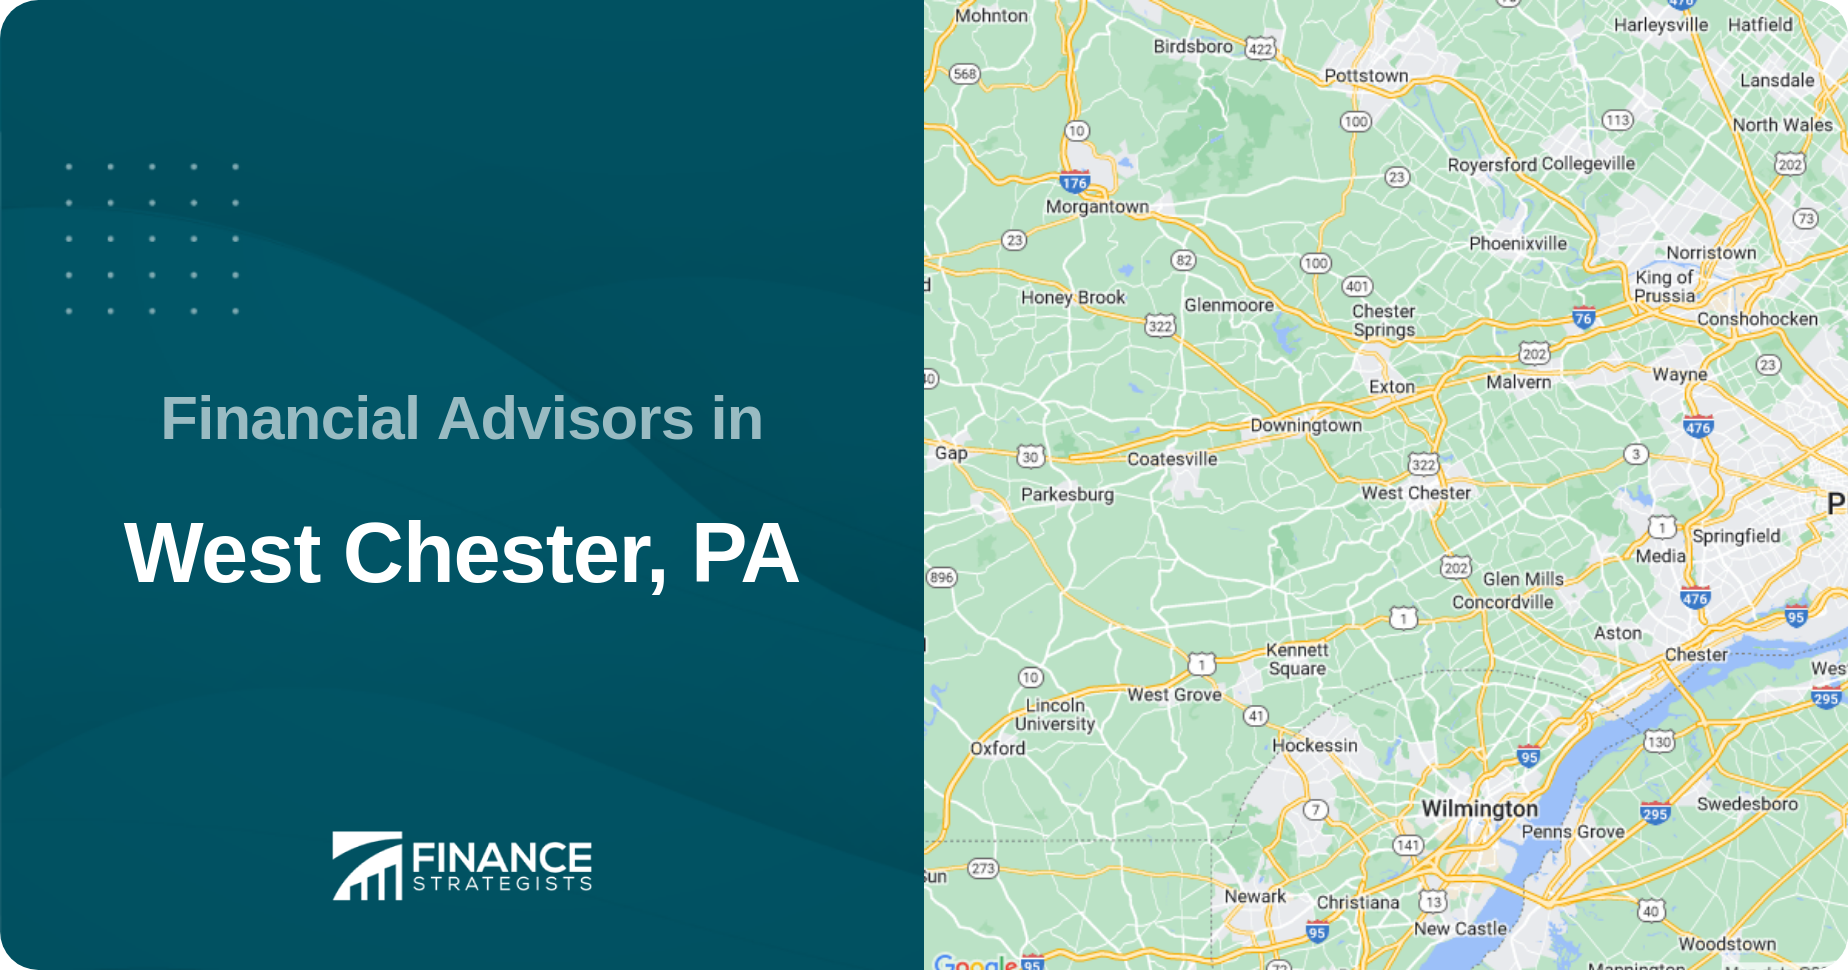 Financial Advisors in West Chester, PA